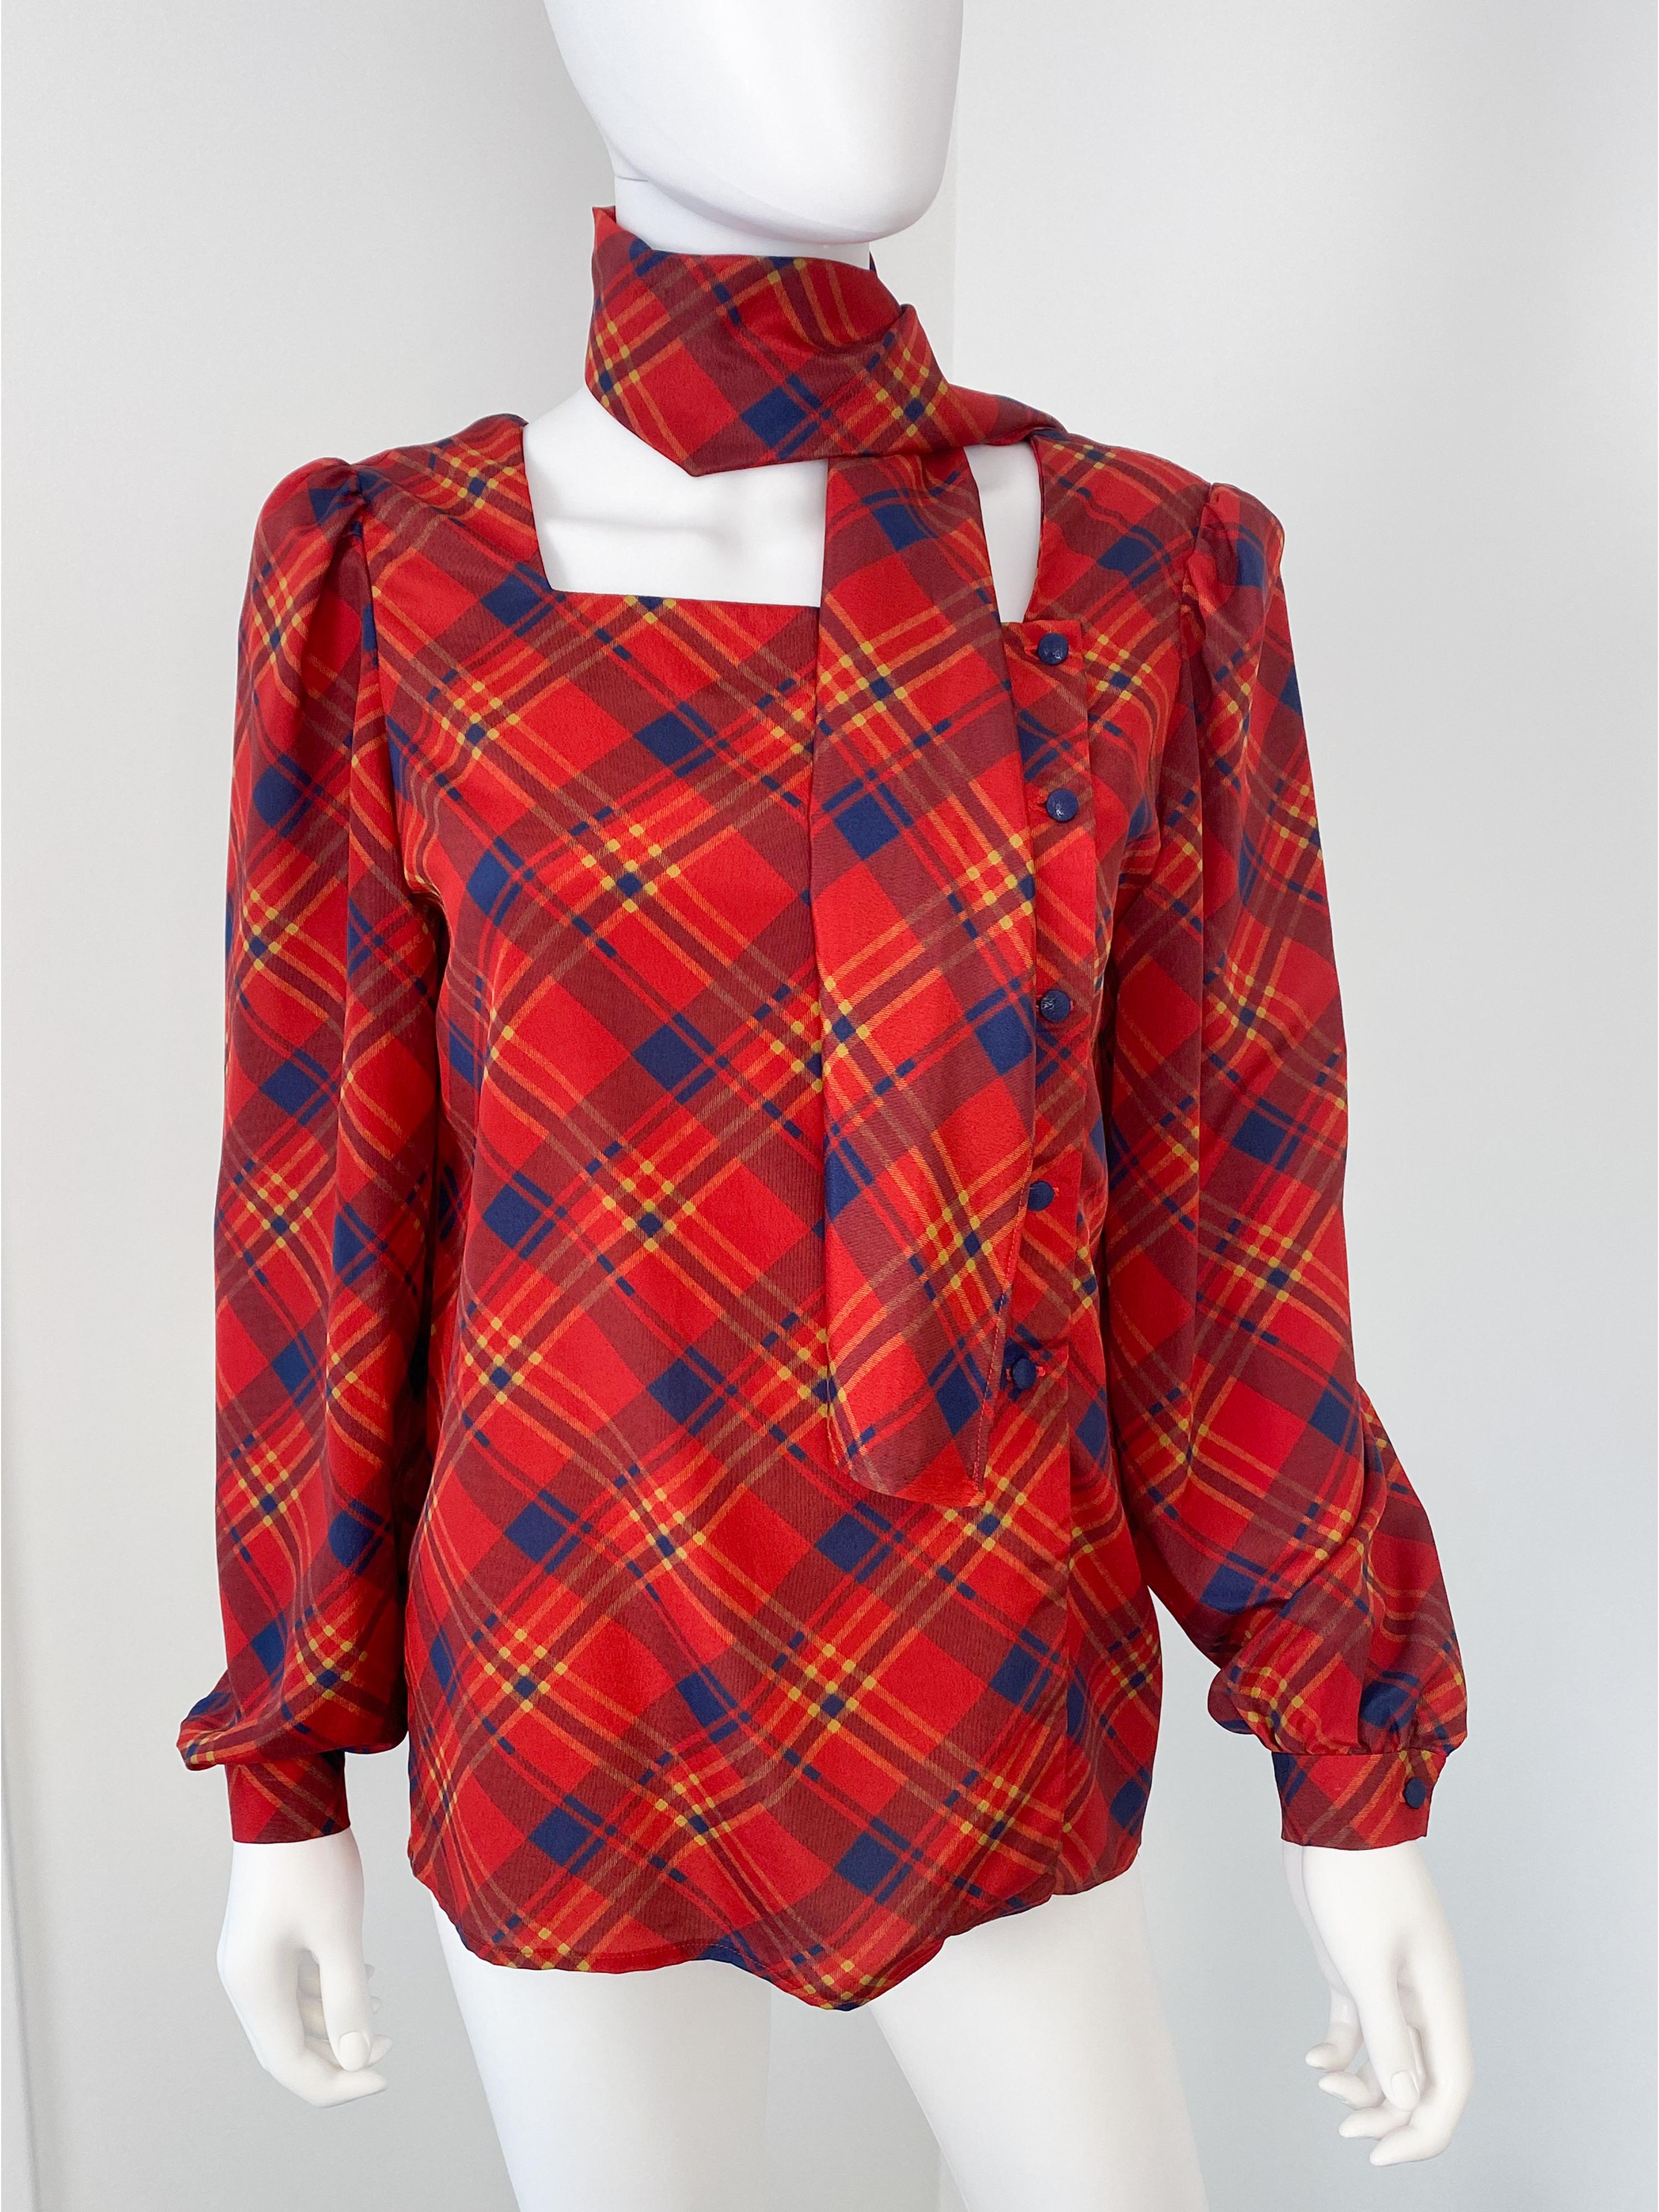 Vintage 1980s Silky Polyester Blouse Top Red and Blue Tartan Size 6/8 For Sale 2